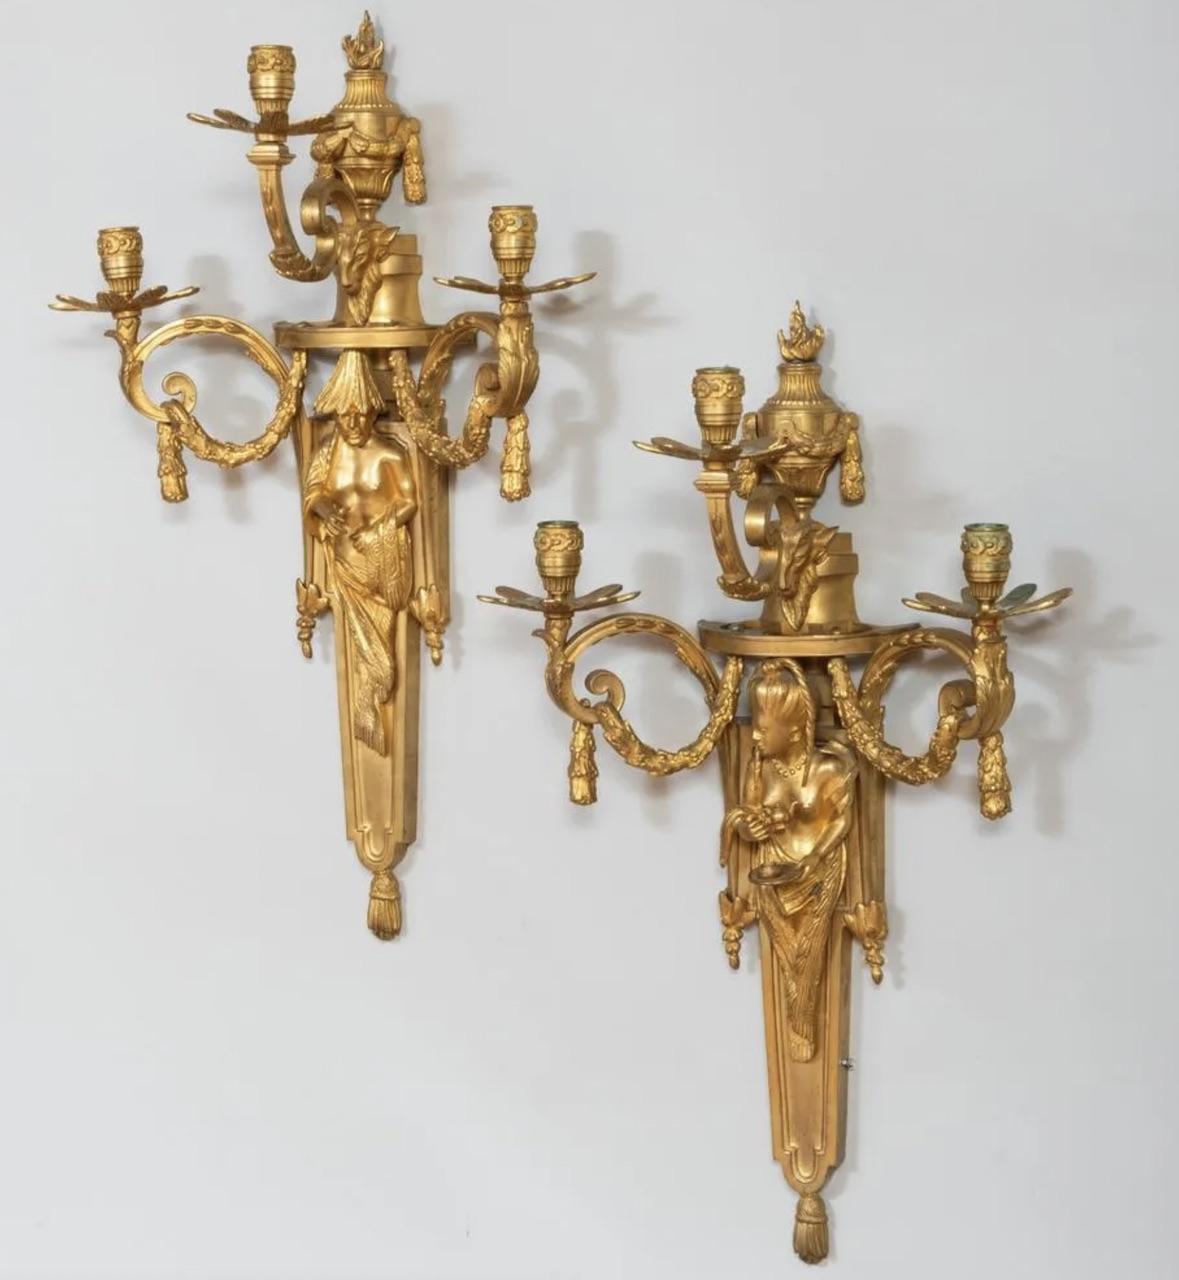 A Fine Pair of Louis XVI Style Gilt-Bronze three branch sconces

Dimensions: 29 in x 18in.